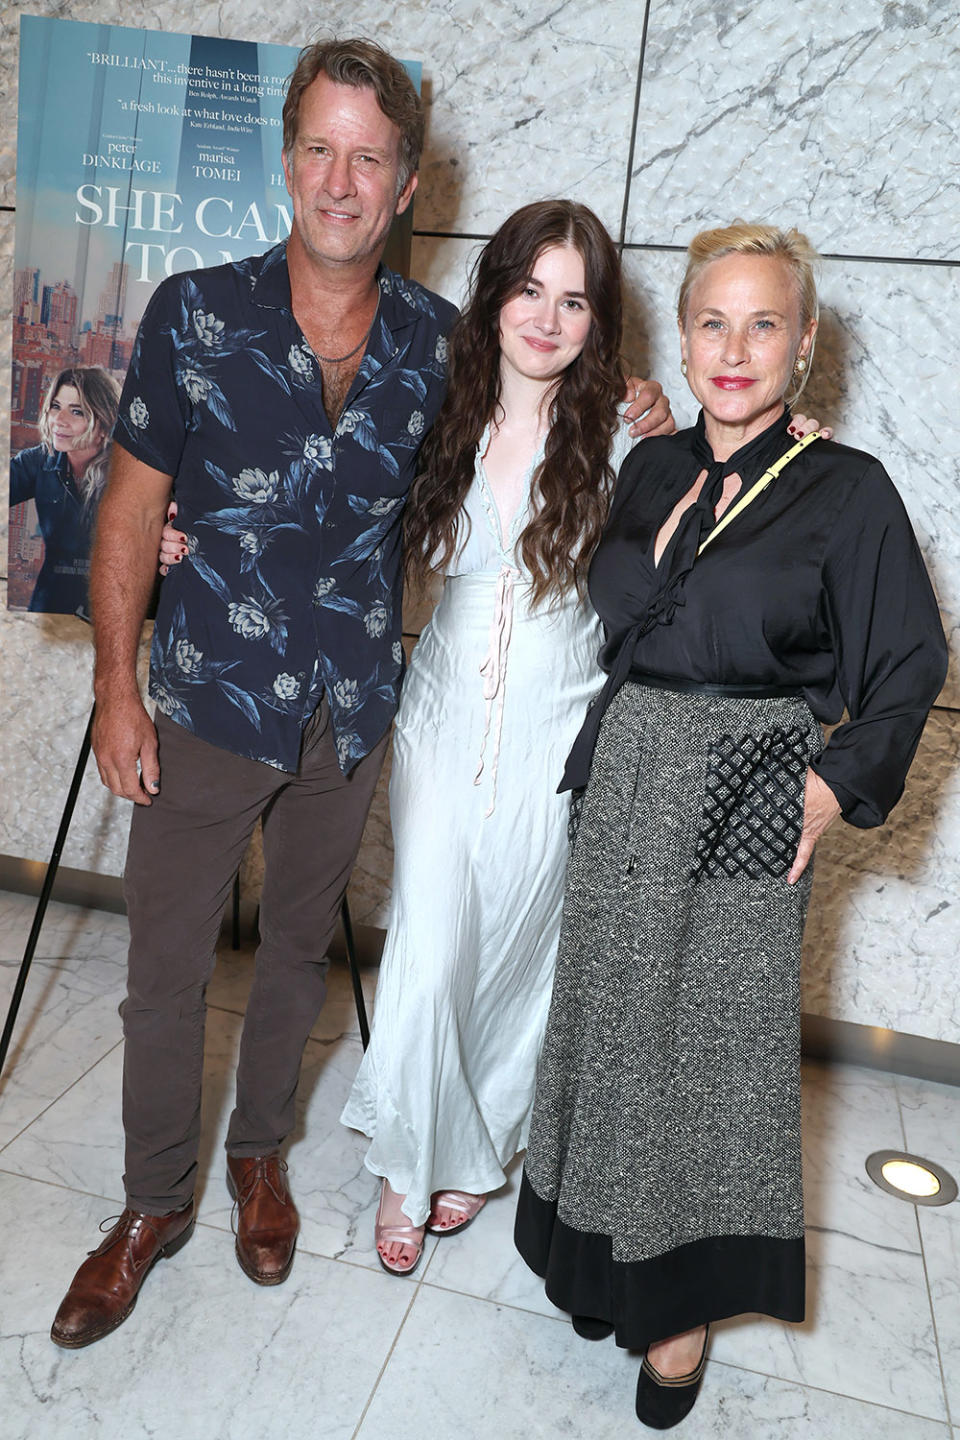 Thomas Jane, Harlow Jane and Patricia Arquette at Vertical’s SHE CAME TO ME special Los Angeles screening, Los Angeles, CA - 27 September 2023